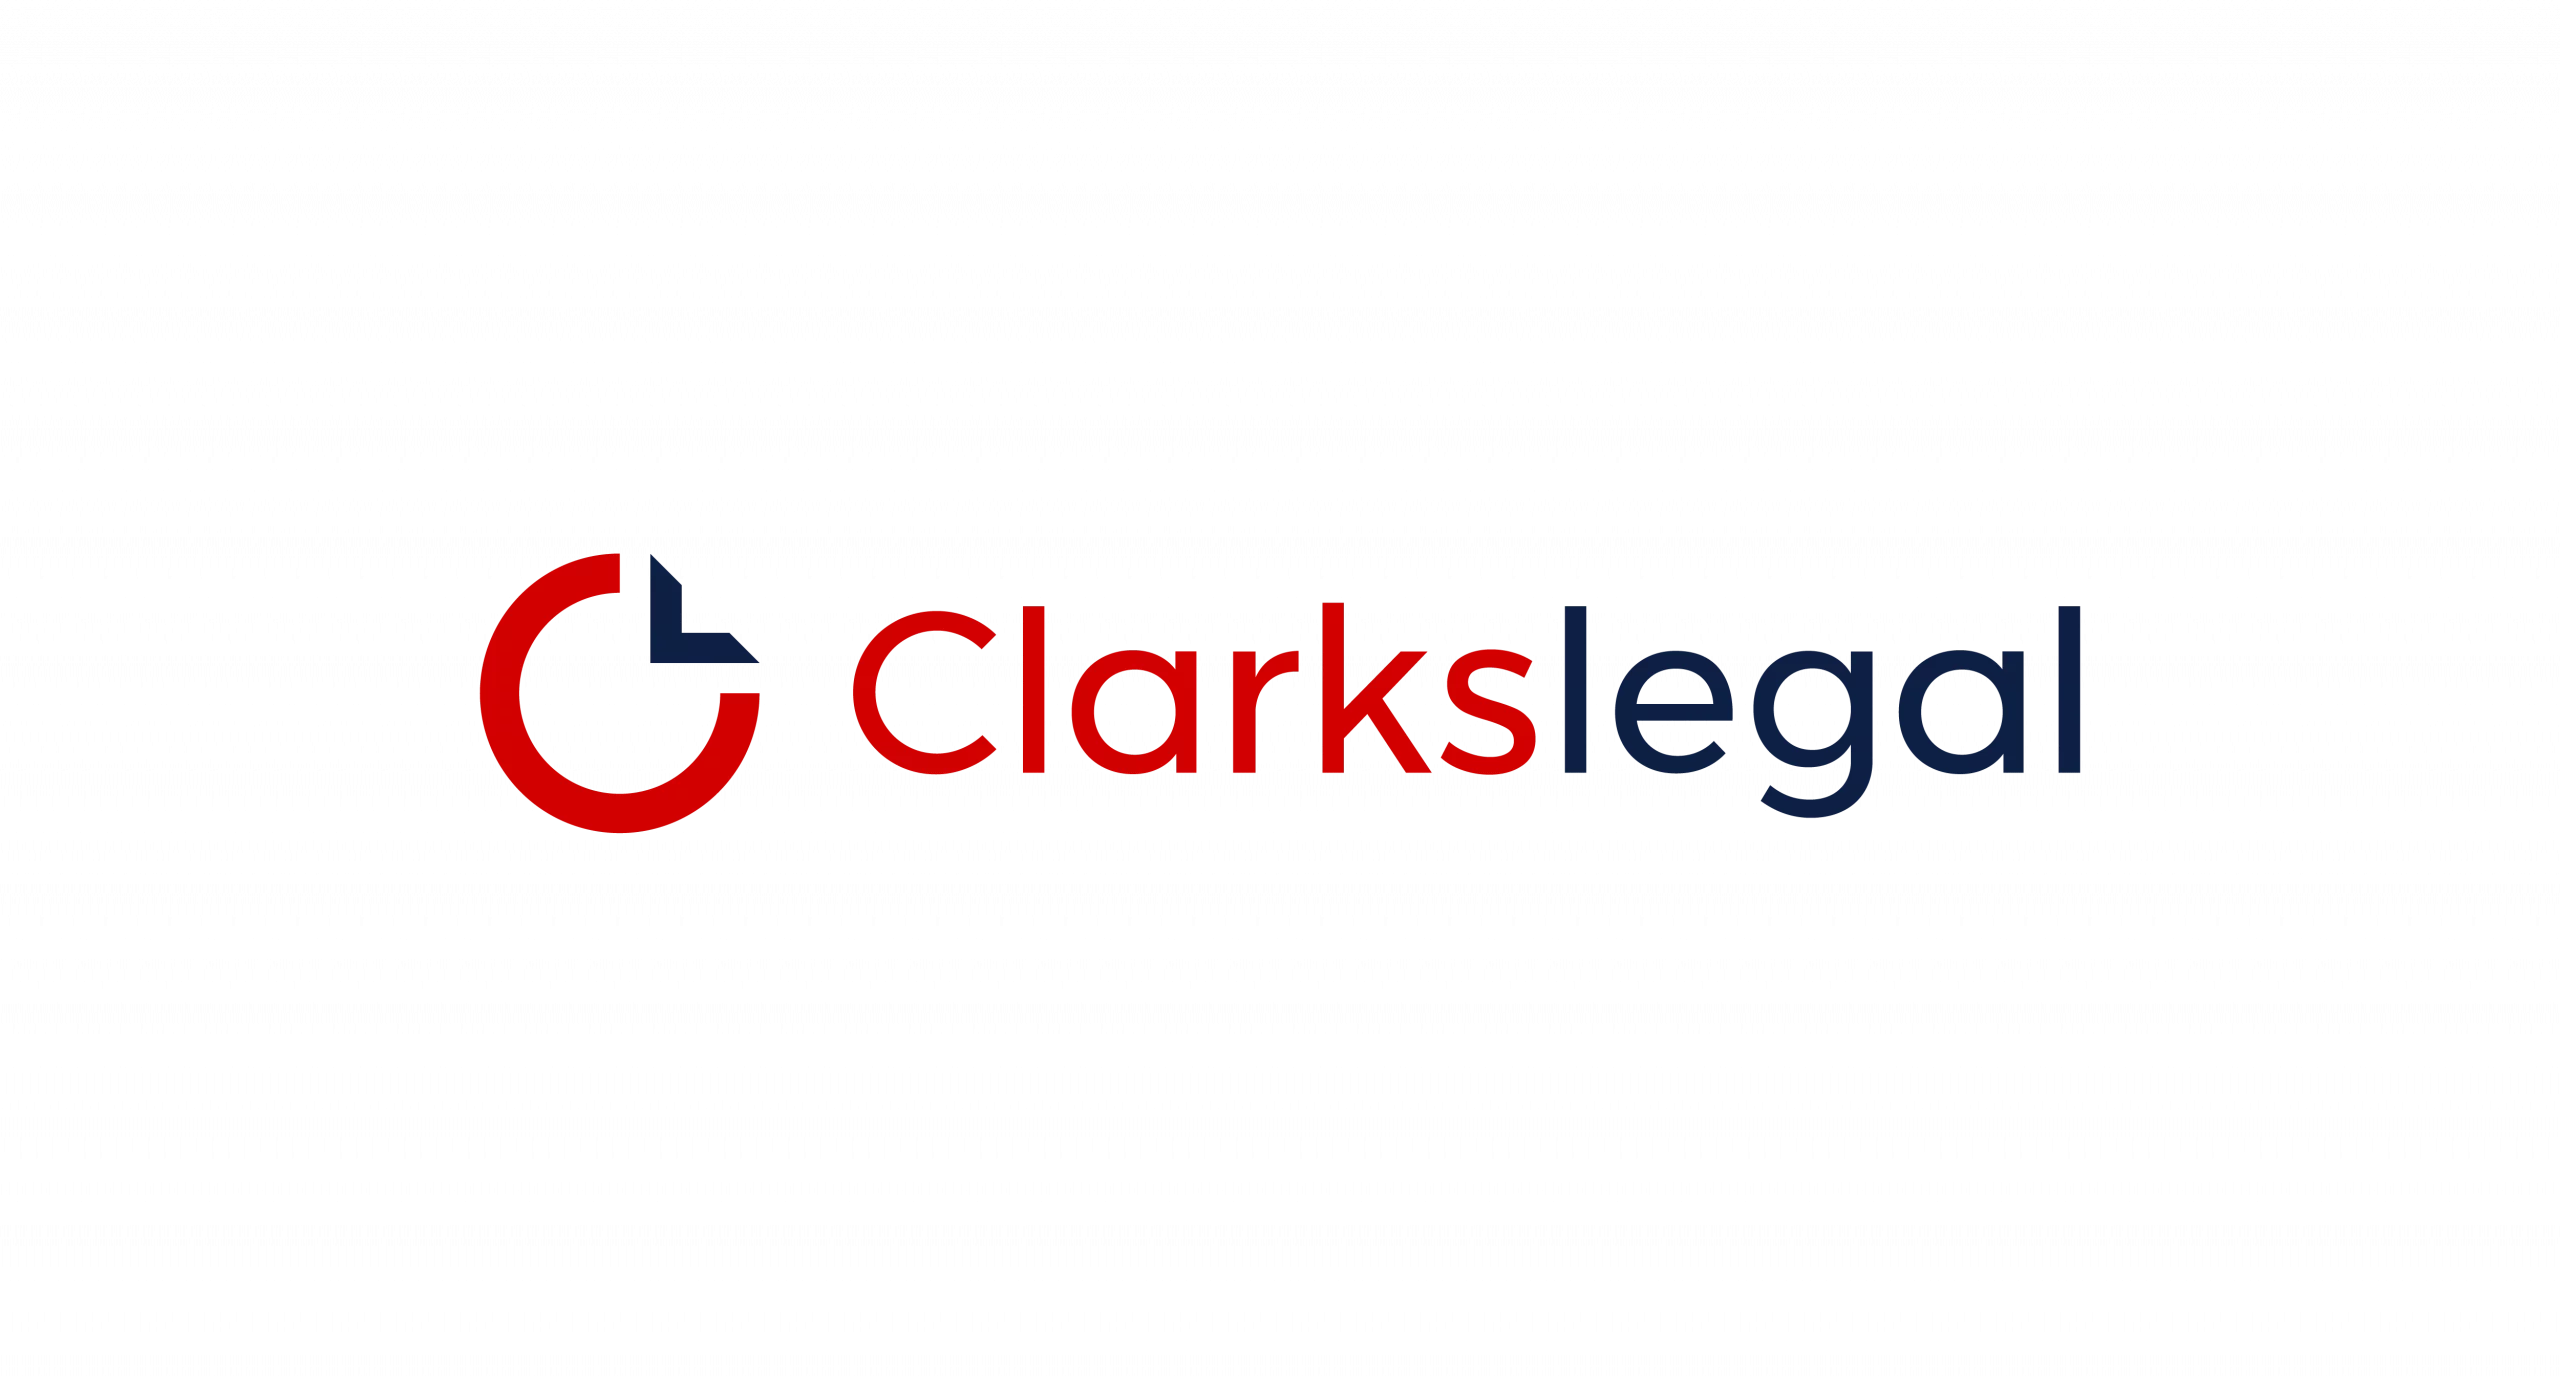 Clarkslegal Colour Brand Identity by Peek Creative Limited